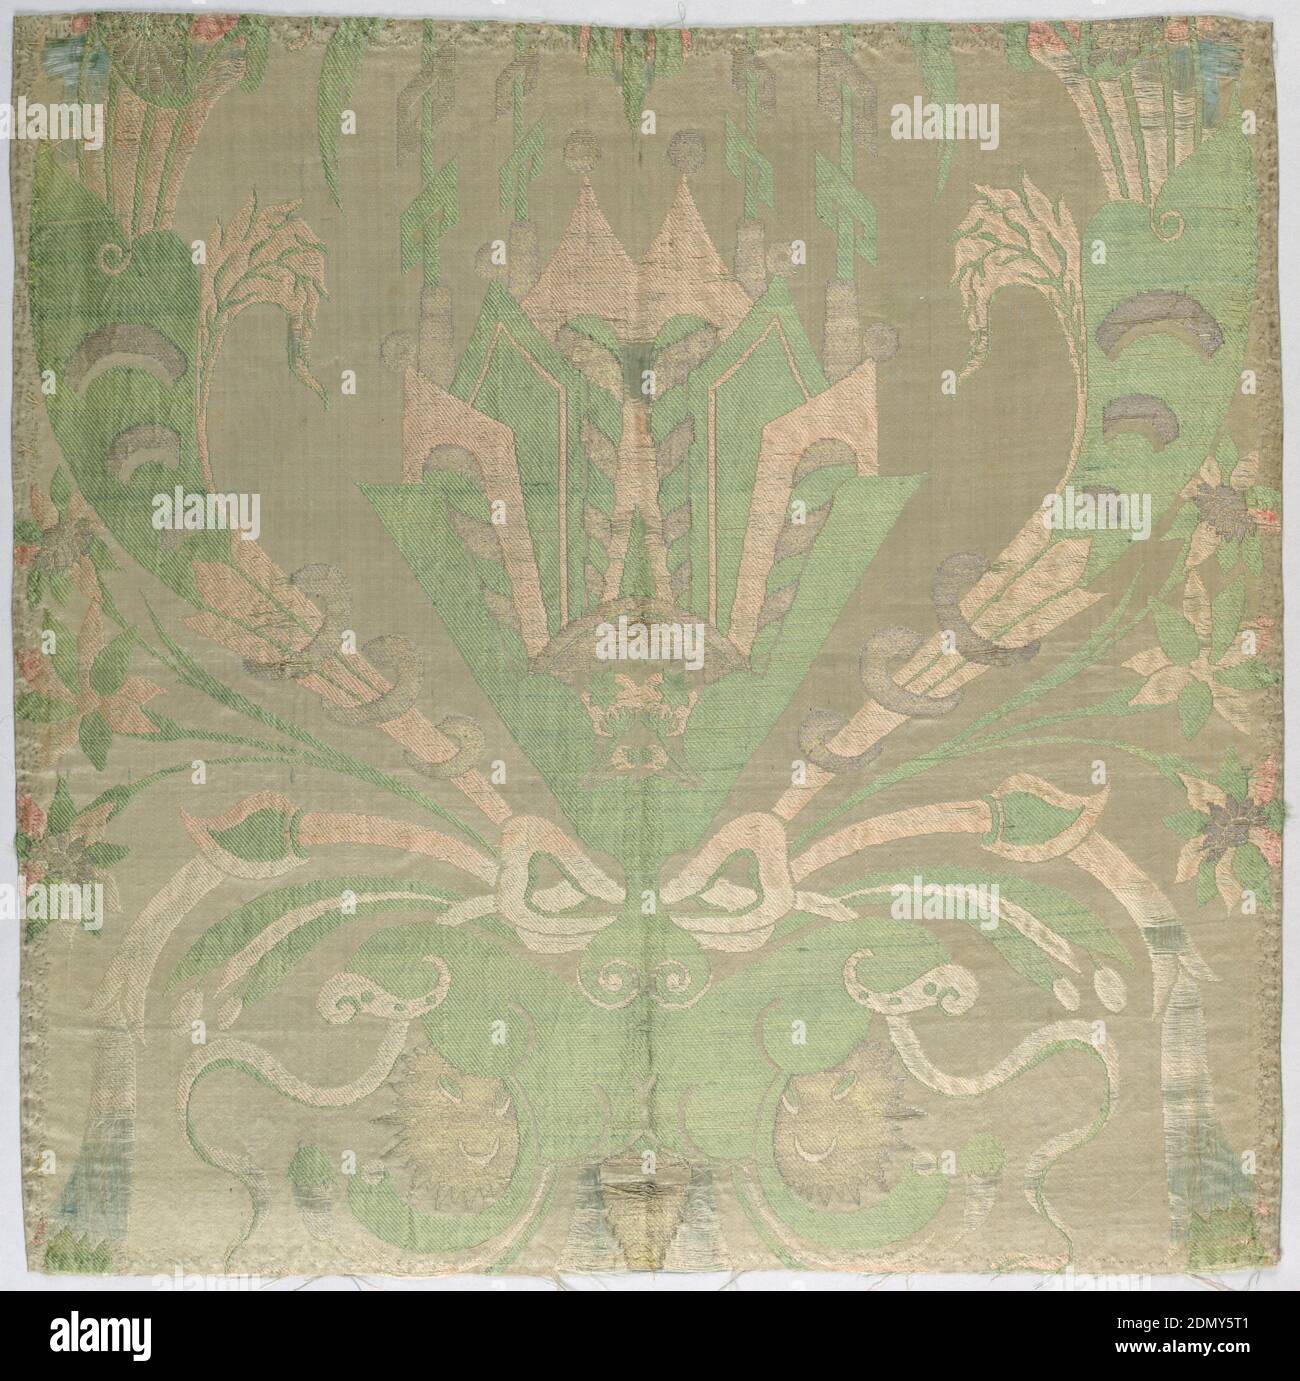 Textile, Medium: silk, metallic yarns Technique: compound satin weave with supplementary weft patterning (brocade), White satin ground brocaded with symmetrical design in gold, and green, coral and pink silk. Large, central fan-shaped ornamental motif with cornucopia and a bow. Backed with red silk and edged with gold metal lace., Spain, 17th century, woven textiles, Textile Stock Photo